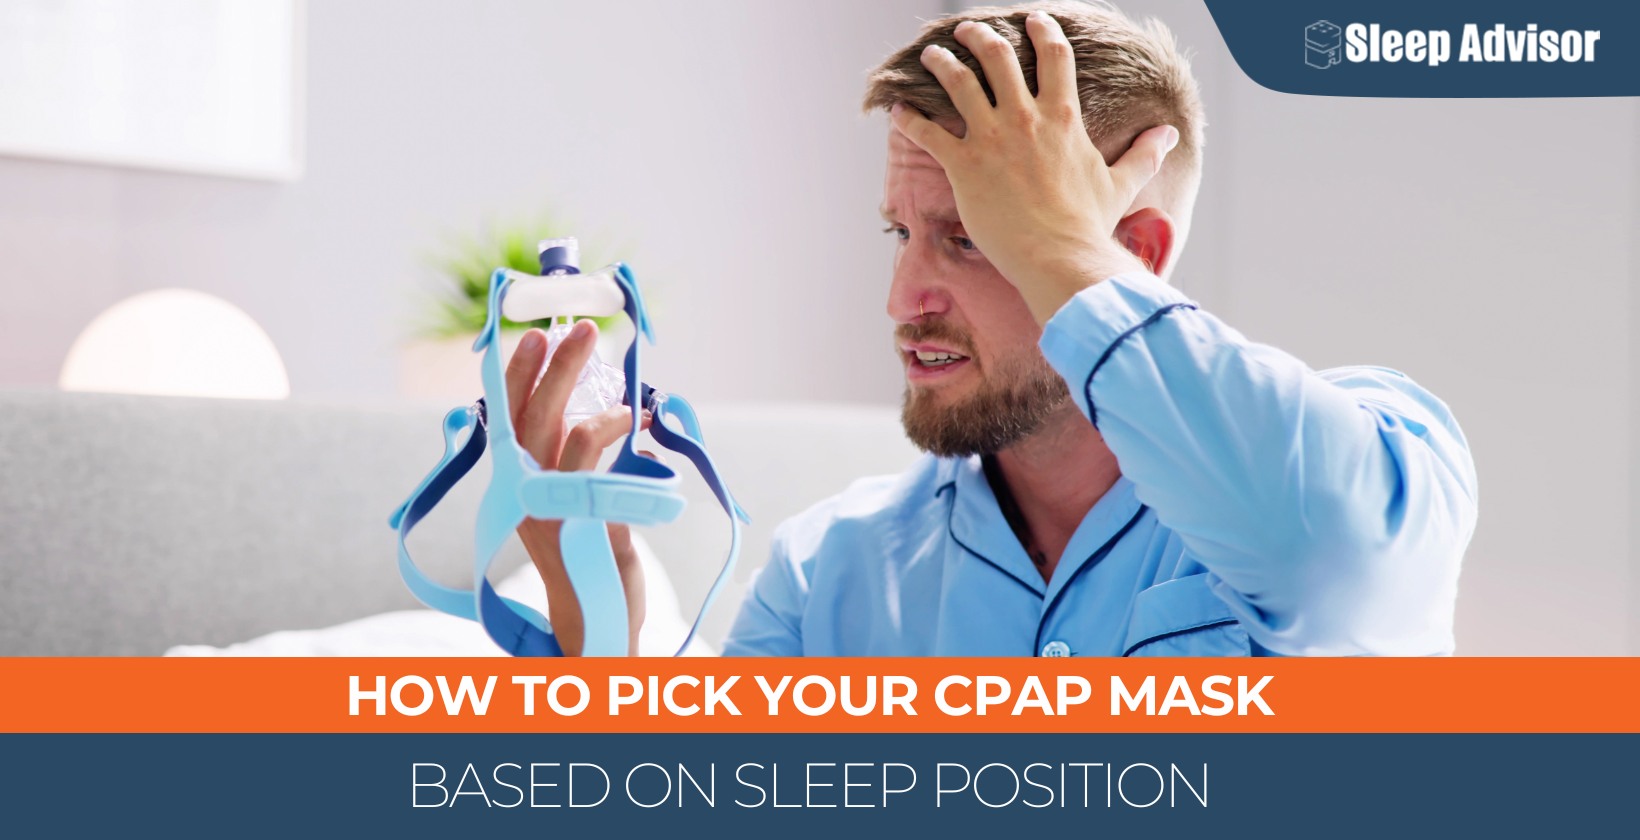 How to Pick Your CPAP Mask Based on Sleep Position